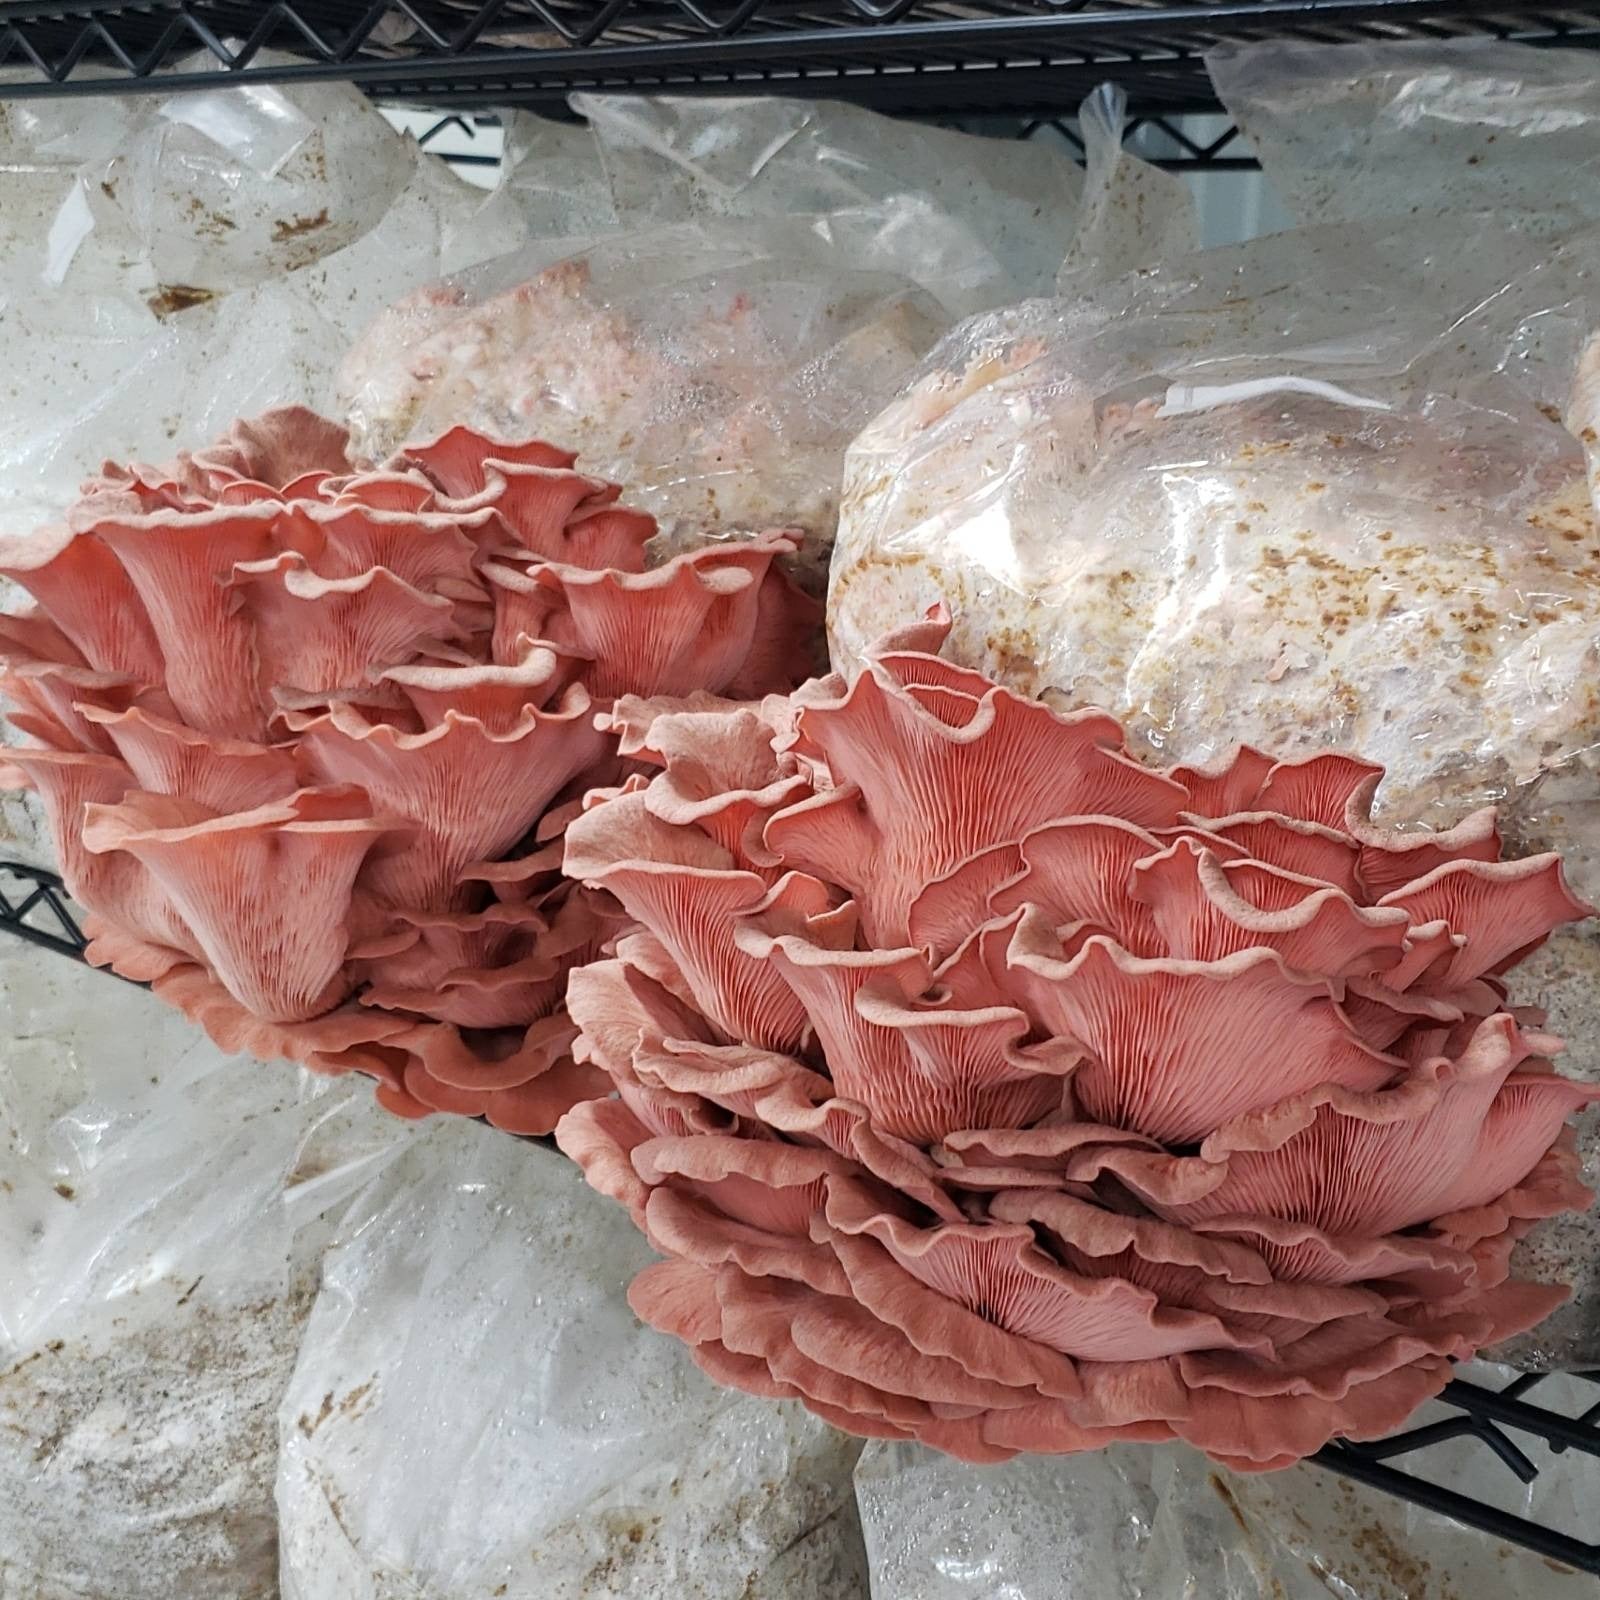 pink oyster mushrooms growing out the side of a bag